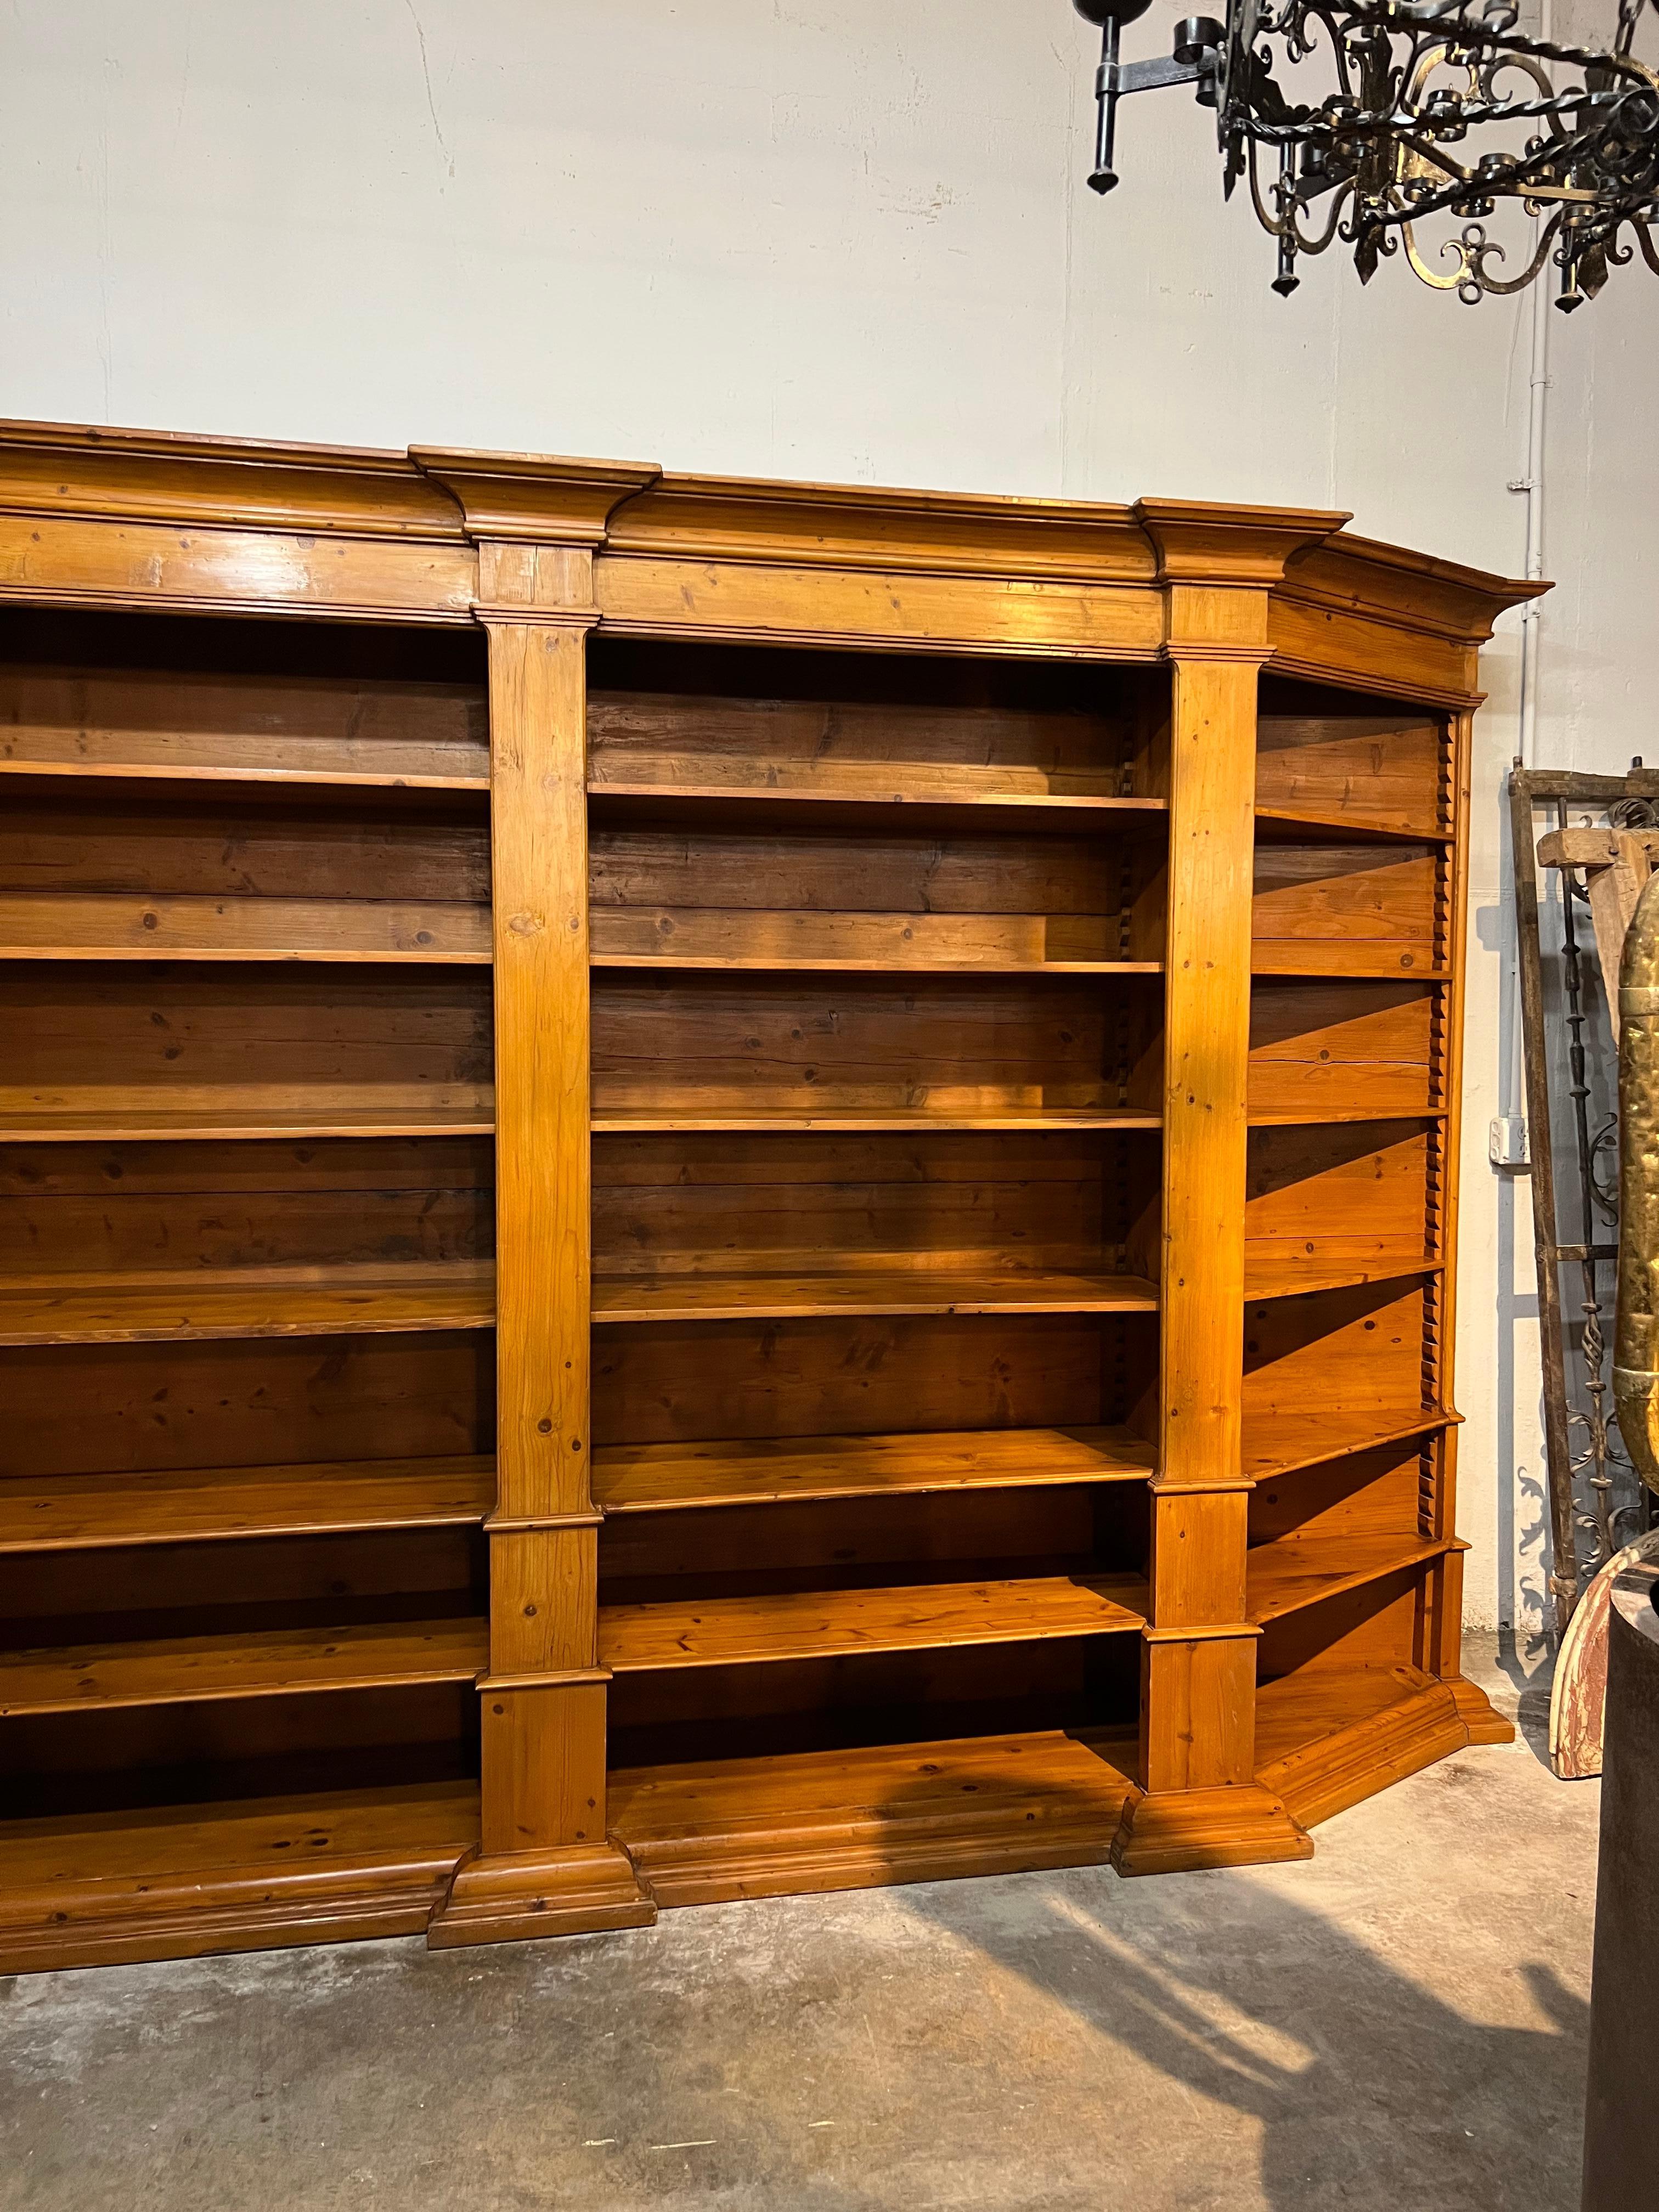 Late 19th - Early 20th Century Italian Bibliotheque For Sale 3